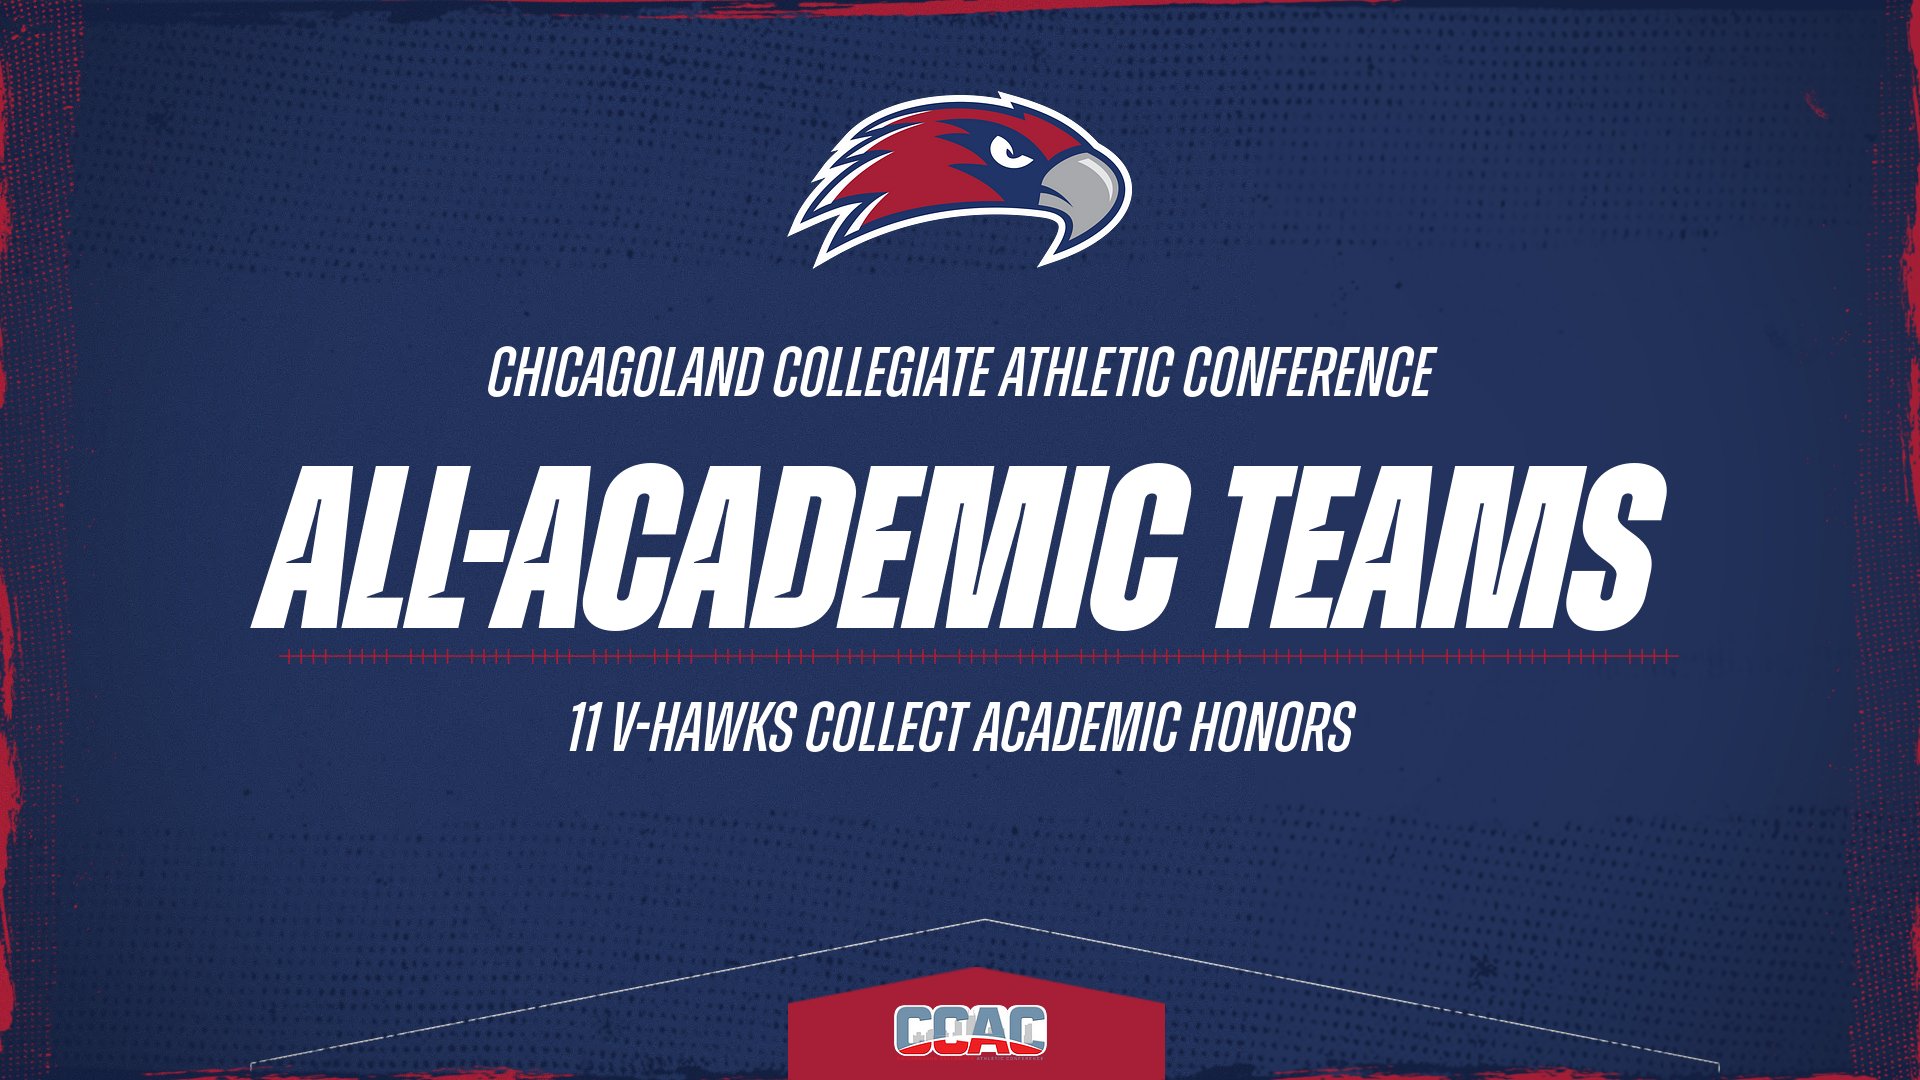 11 V-Hawks Named to CCAC All-Academic Teams